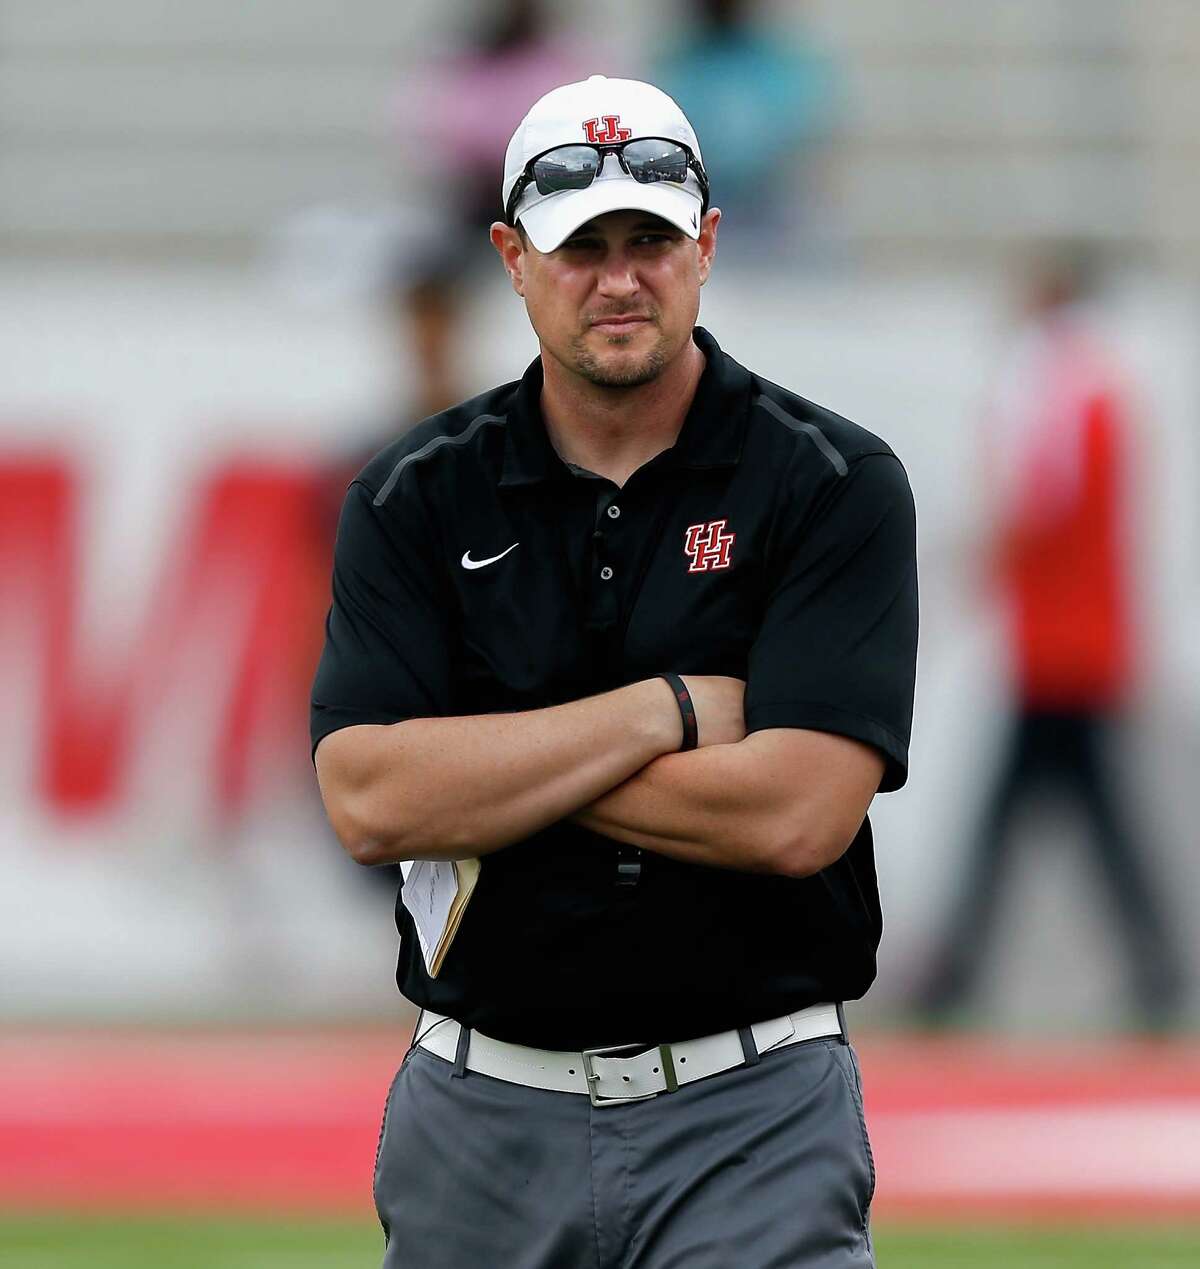 UH coach Tom Herman had a special treat for his players to mark the end of the Cougars' fall camp.